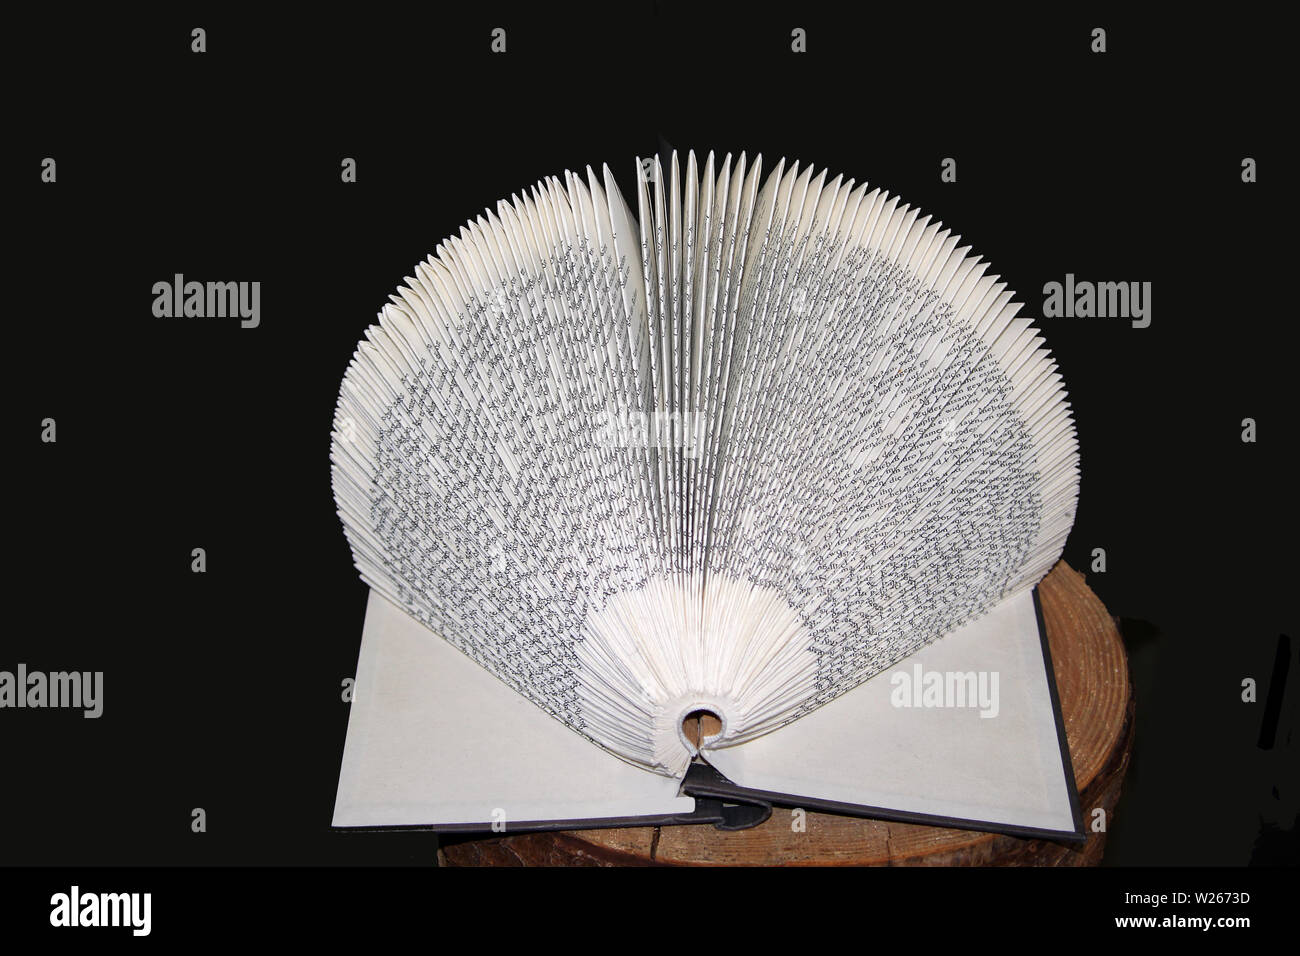 paperwork made of a book, pages folded into a fan, presented on a trunk, black background Stock Photo